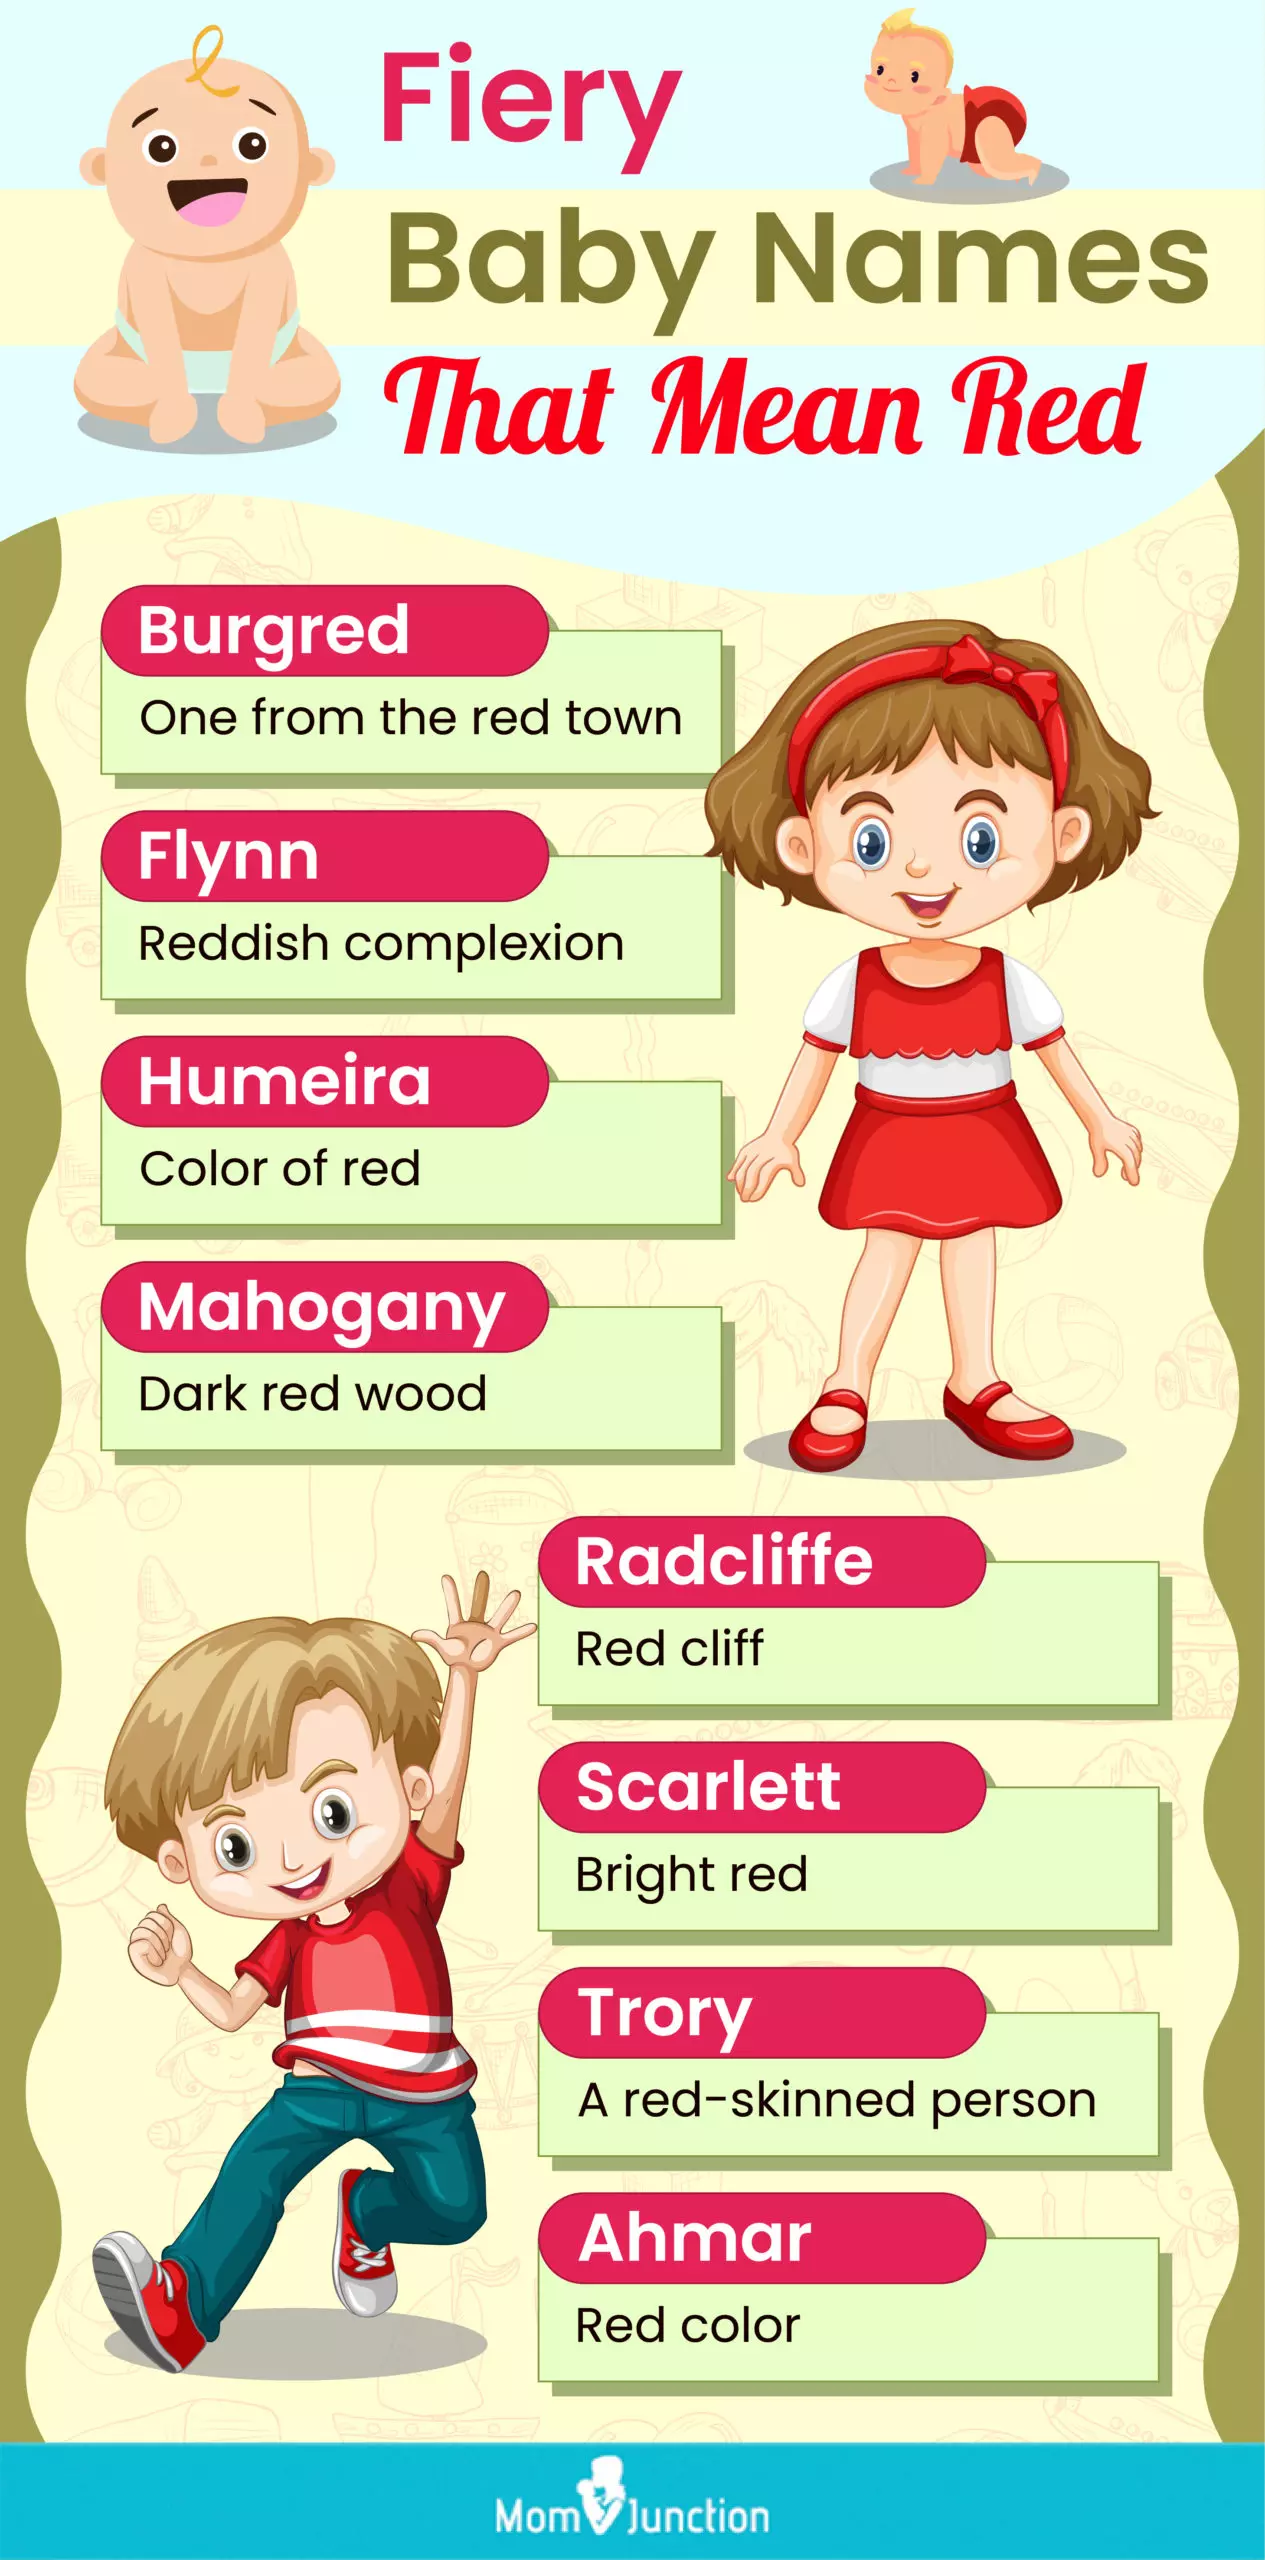 fiery baby names that mean red (infographic)